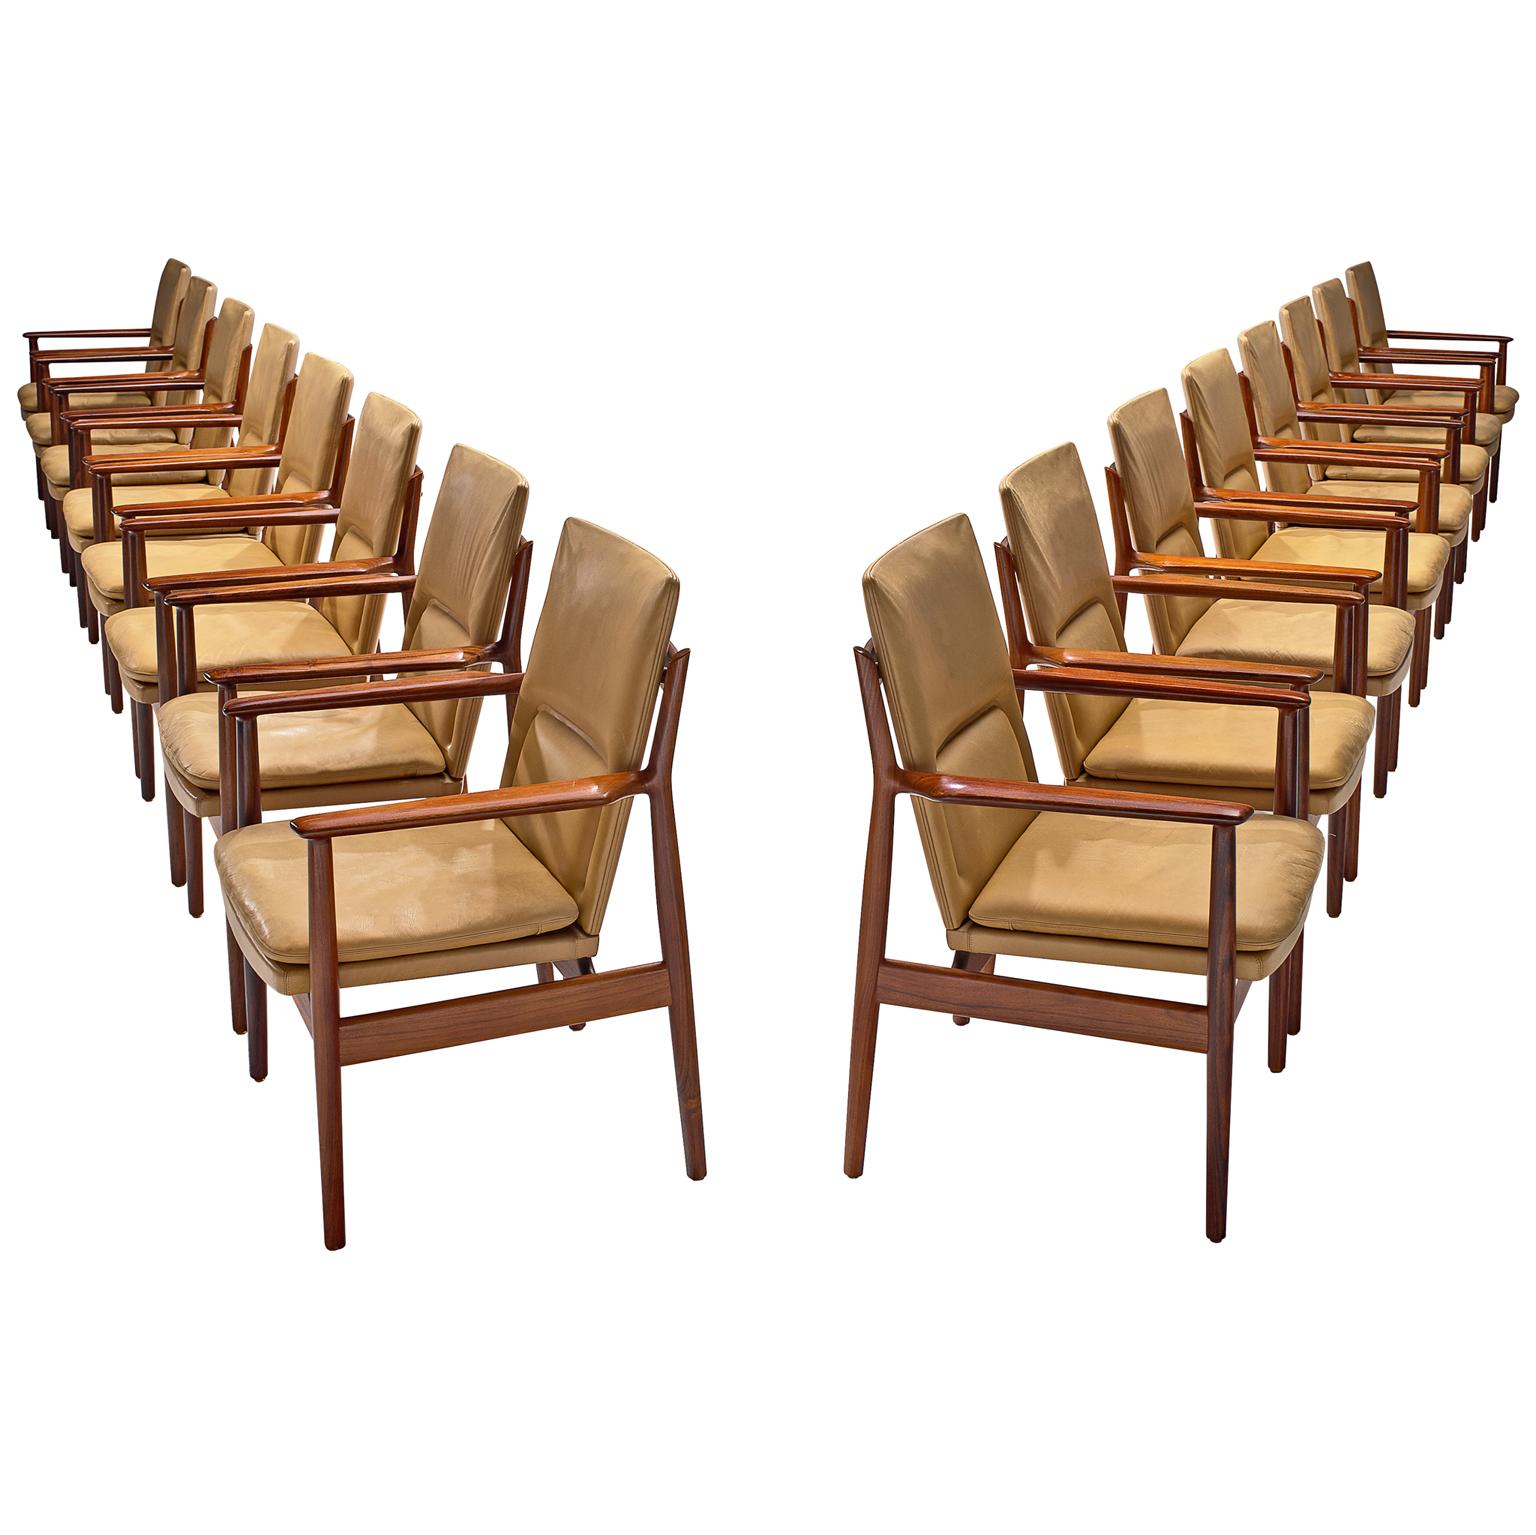 Arne Vodder Set of Sixteen Dining Chairs with Light Cognac Leather